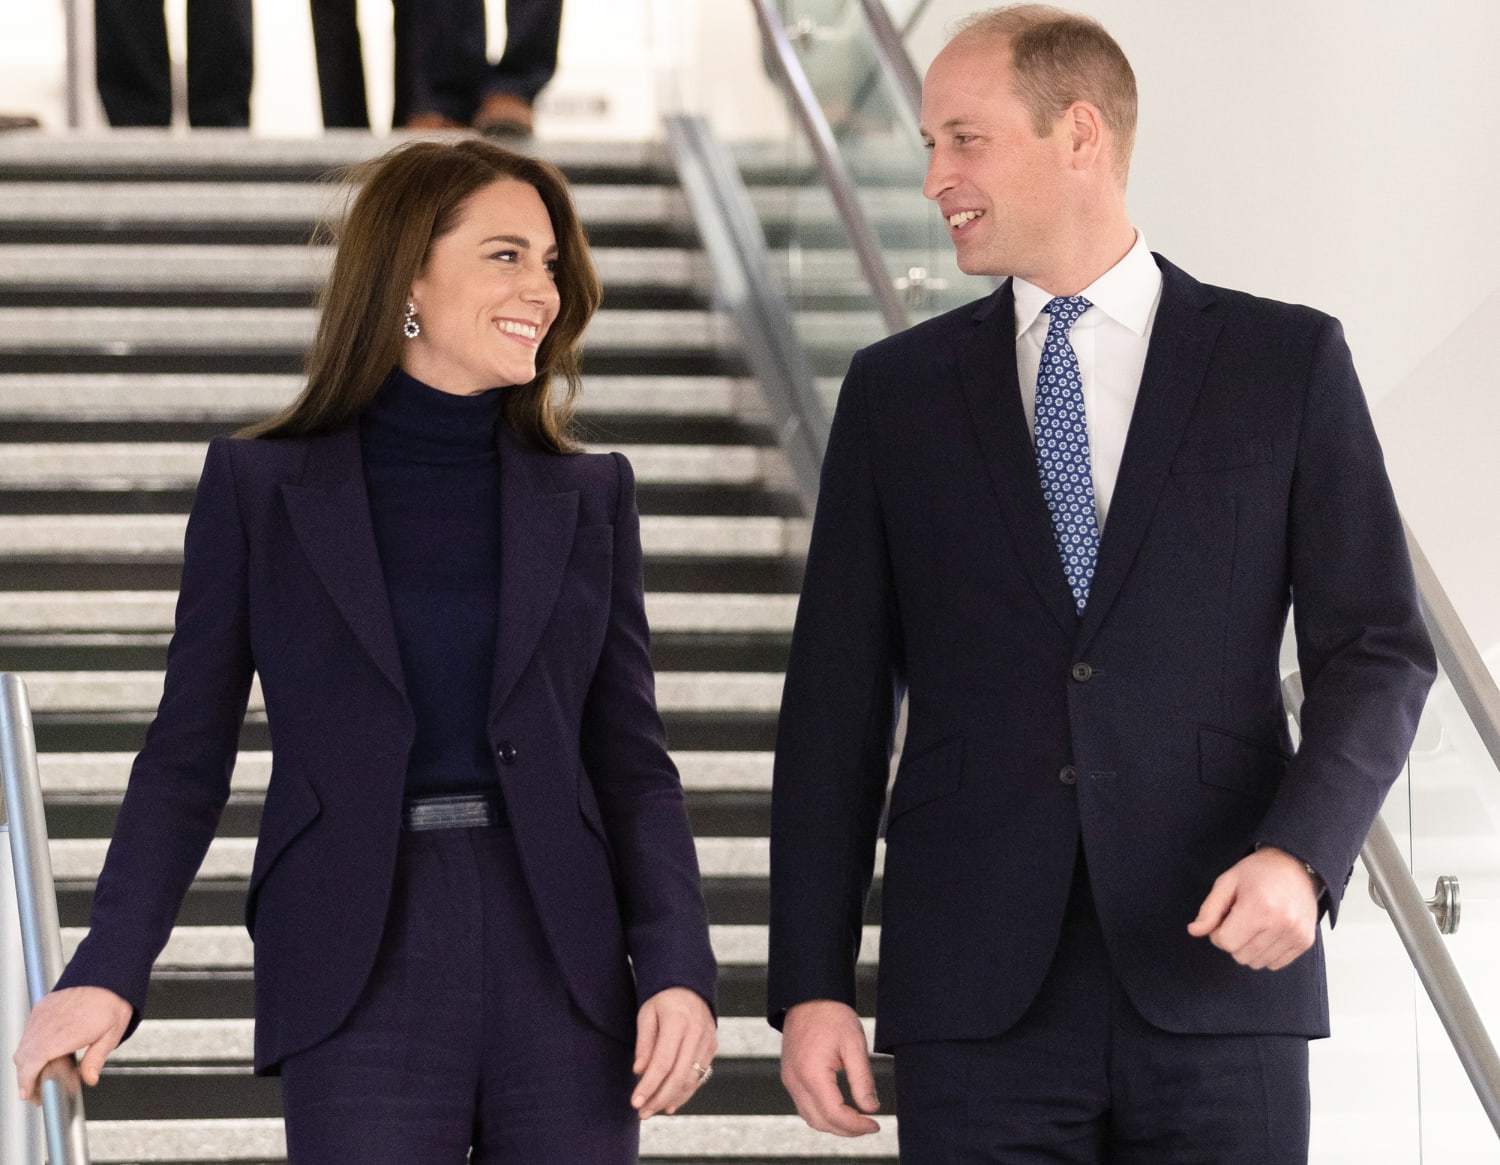 Kate Now Gets A New Royal Title That Prince William Held